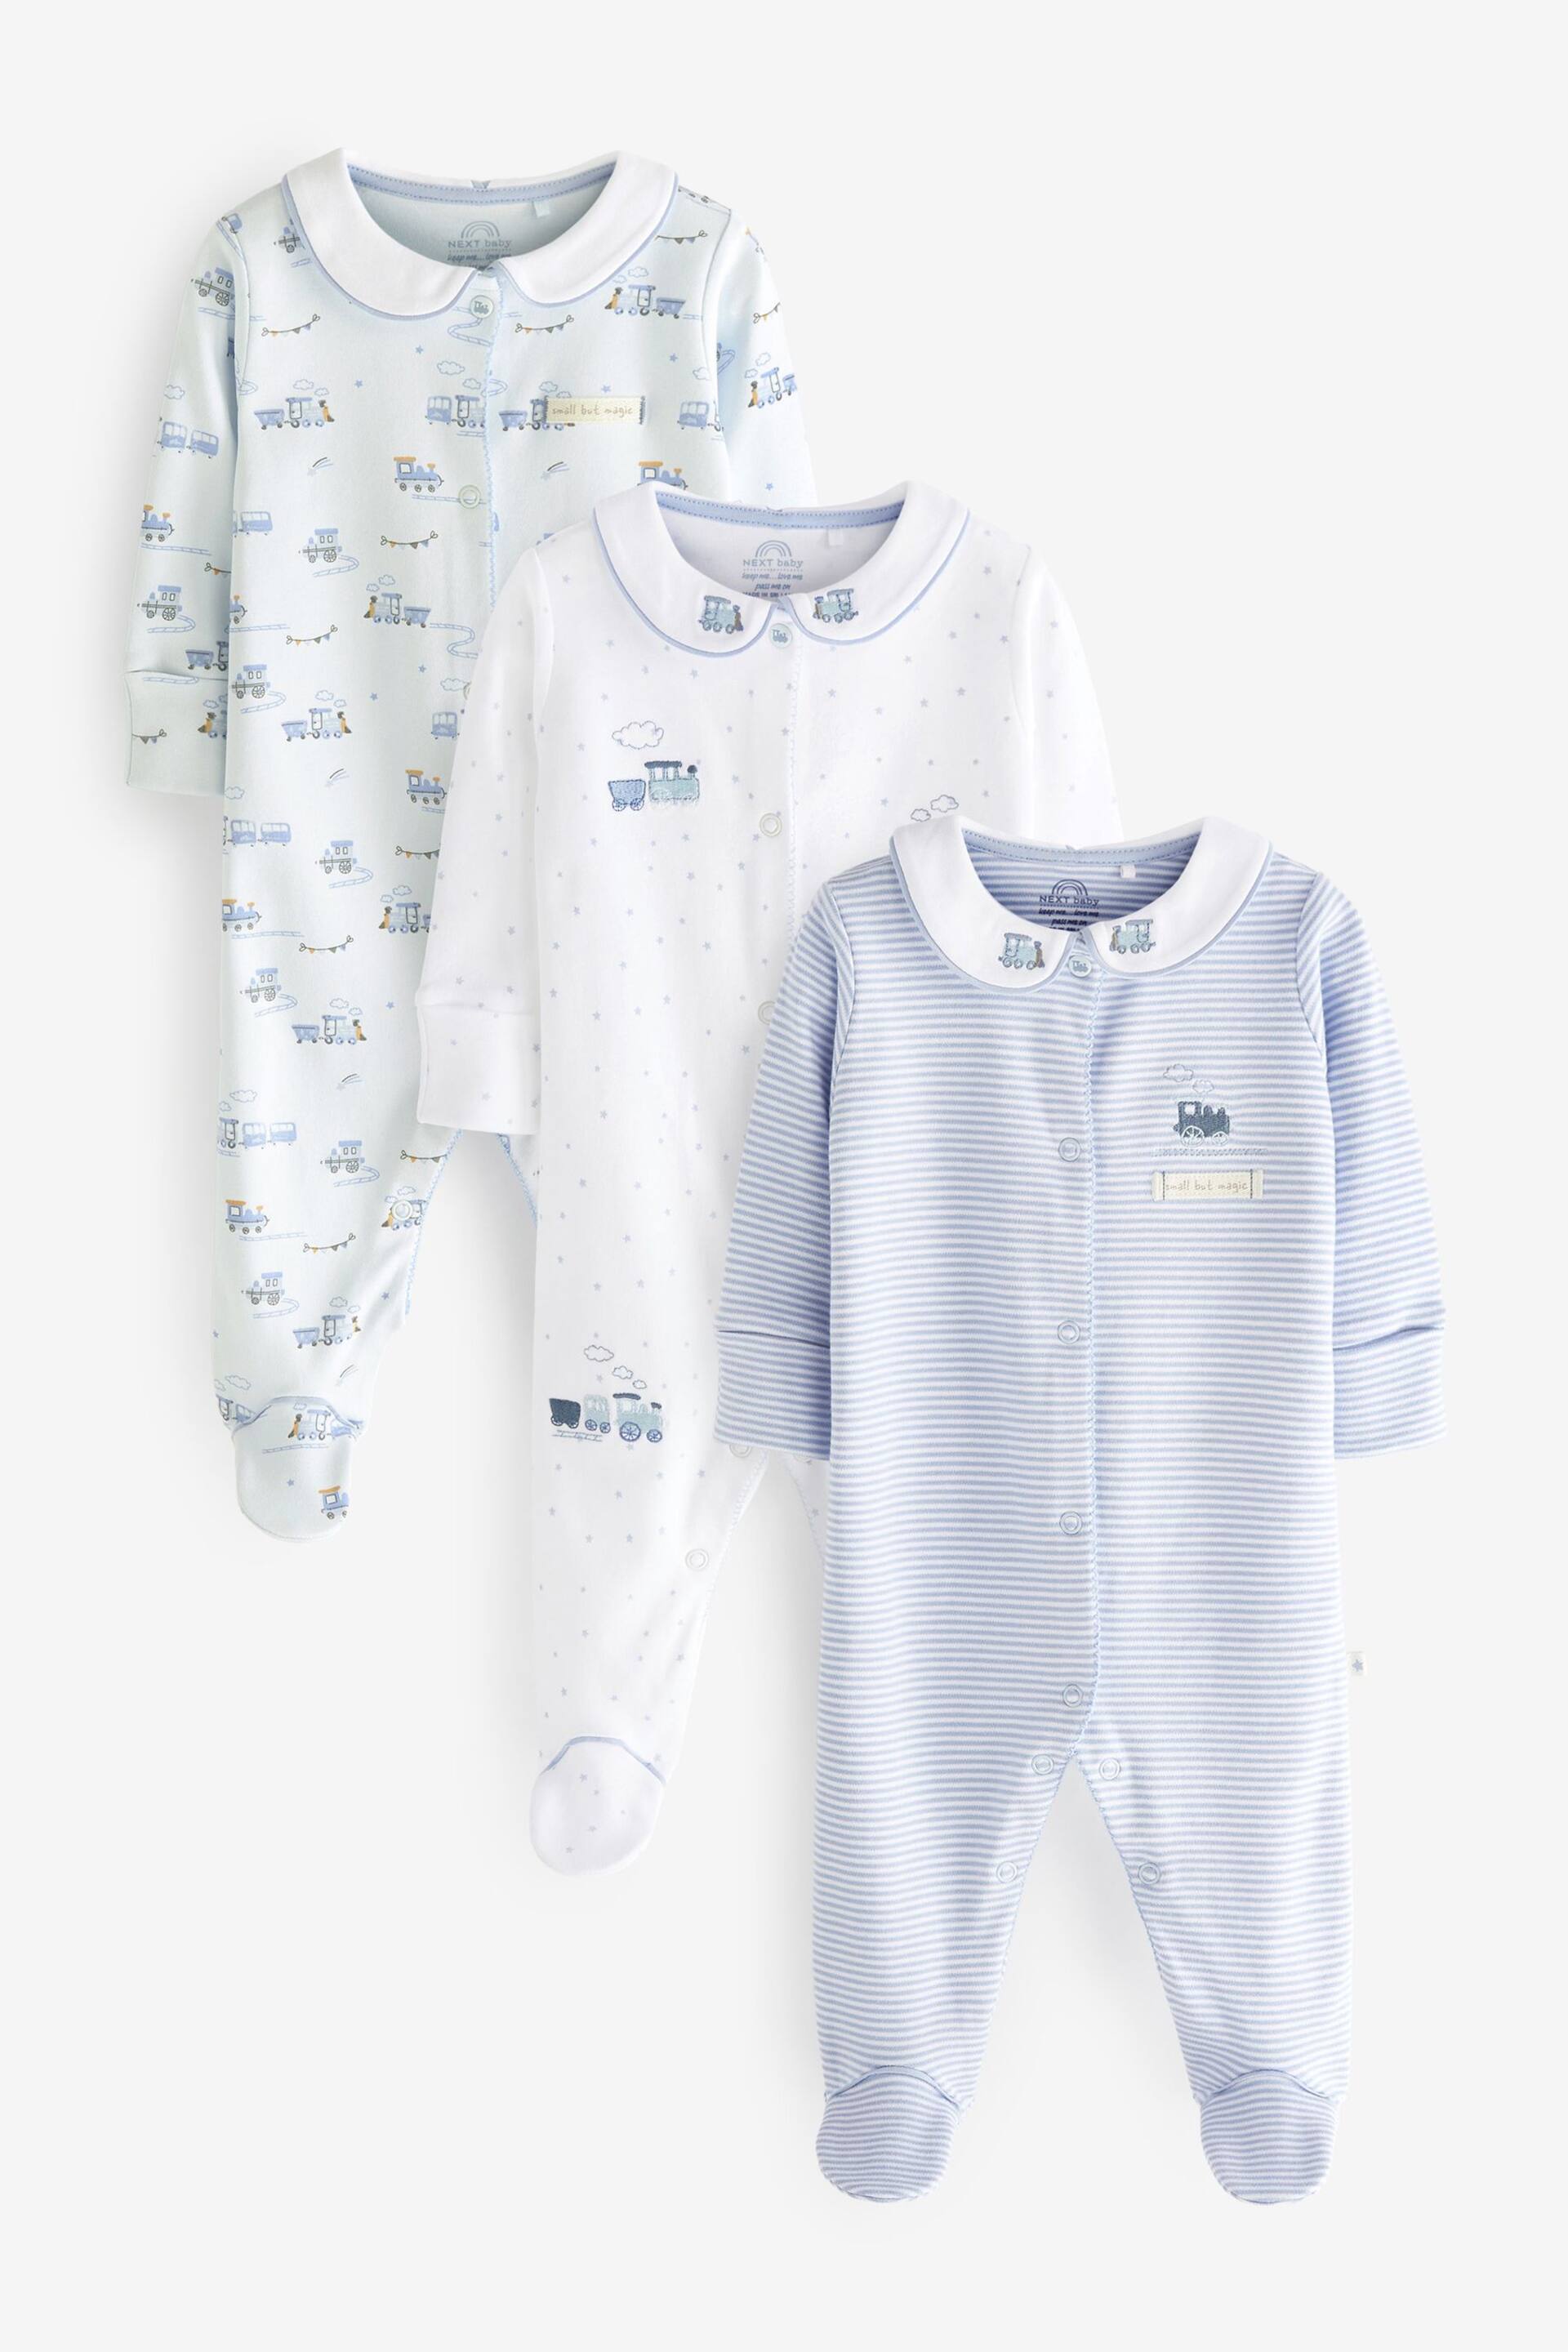 White Baby Sleepsuits 3 Pack (0-2yrs) - Image 8 of 15